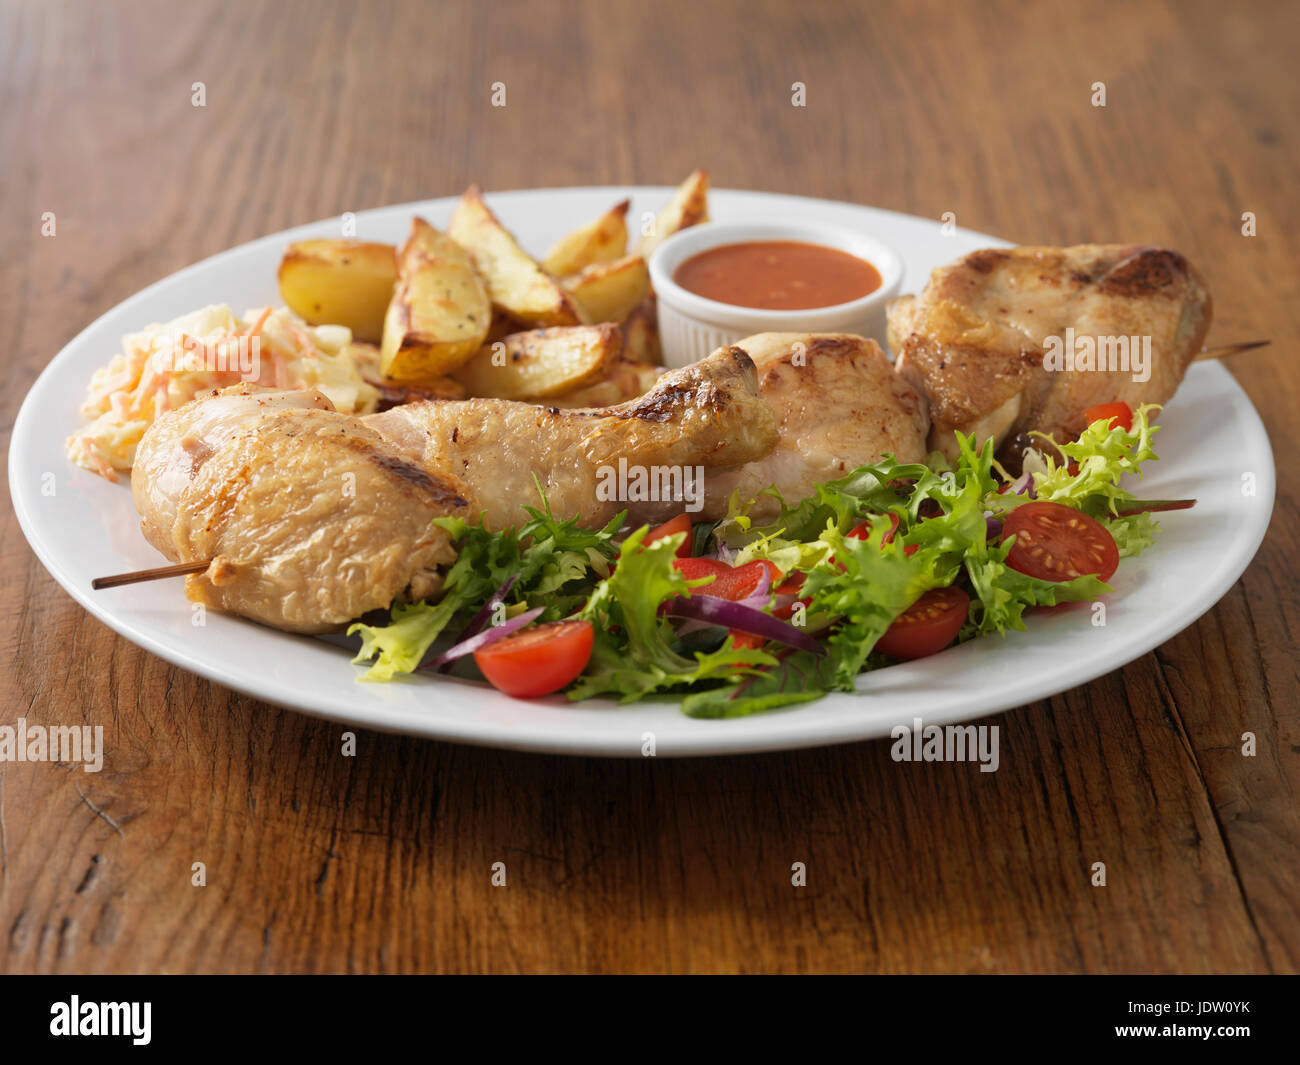 Plate of chicken with salad Stock Photo